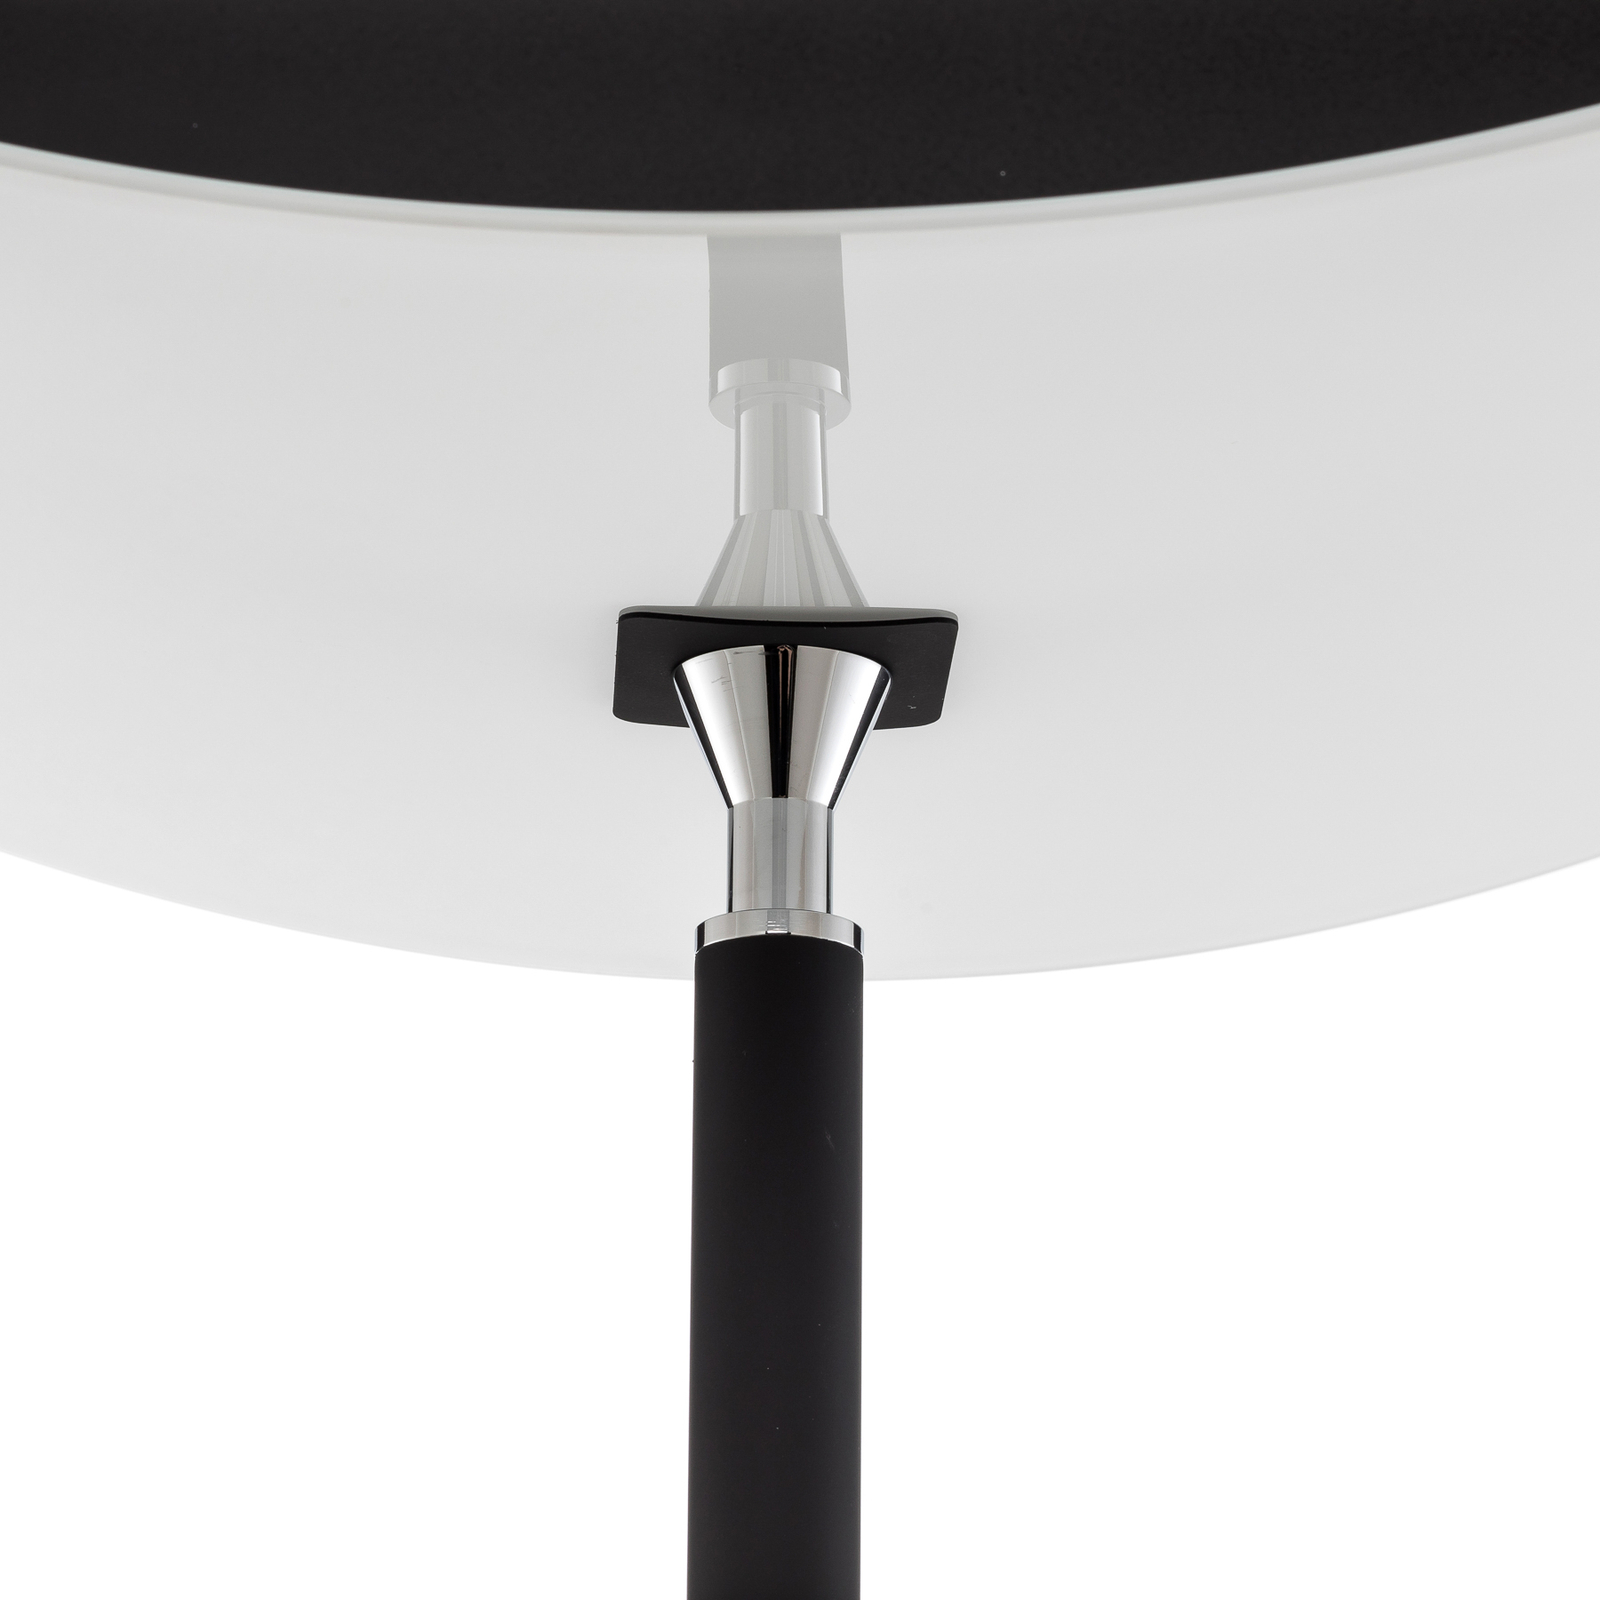 Rothfels Charlin Lampadaire à éclairage indirect LED noir nickel